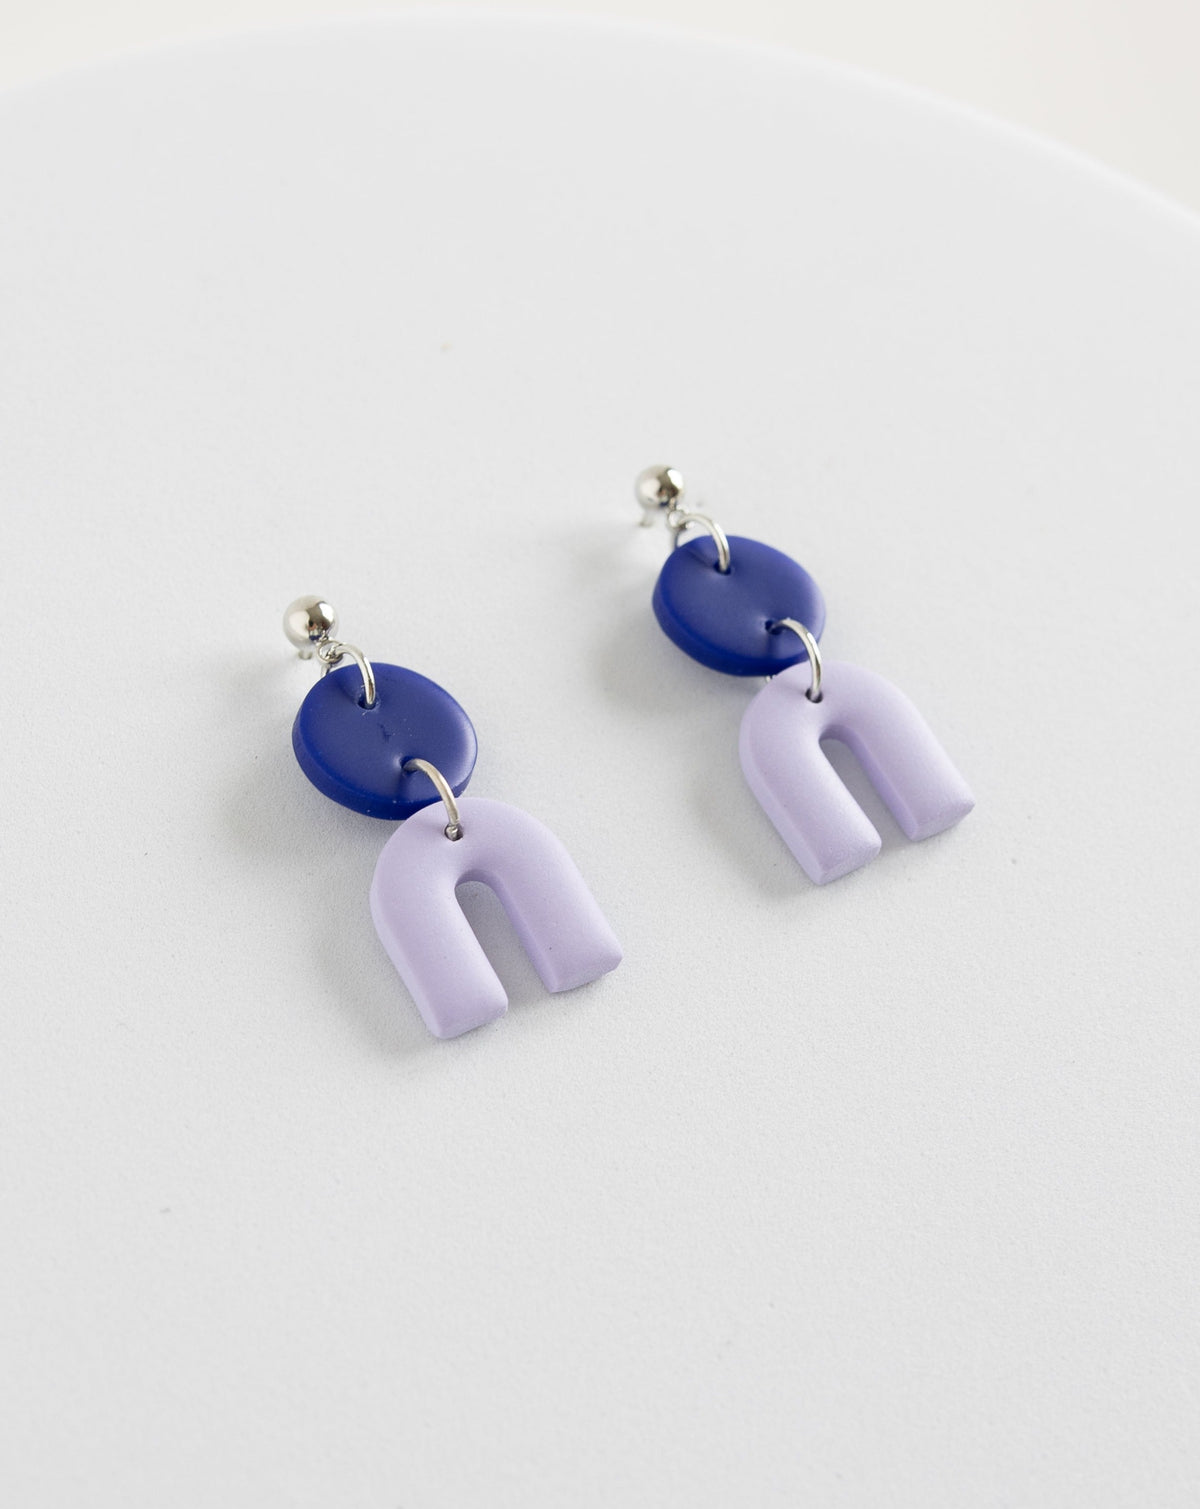 Tiny Arch earrings in two part of Hue Blue and lilac  clay parts with silver Ball studs, angled view.